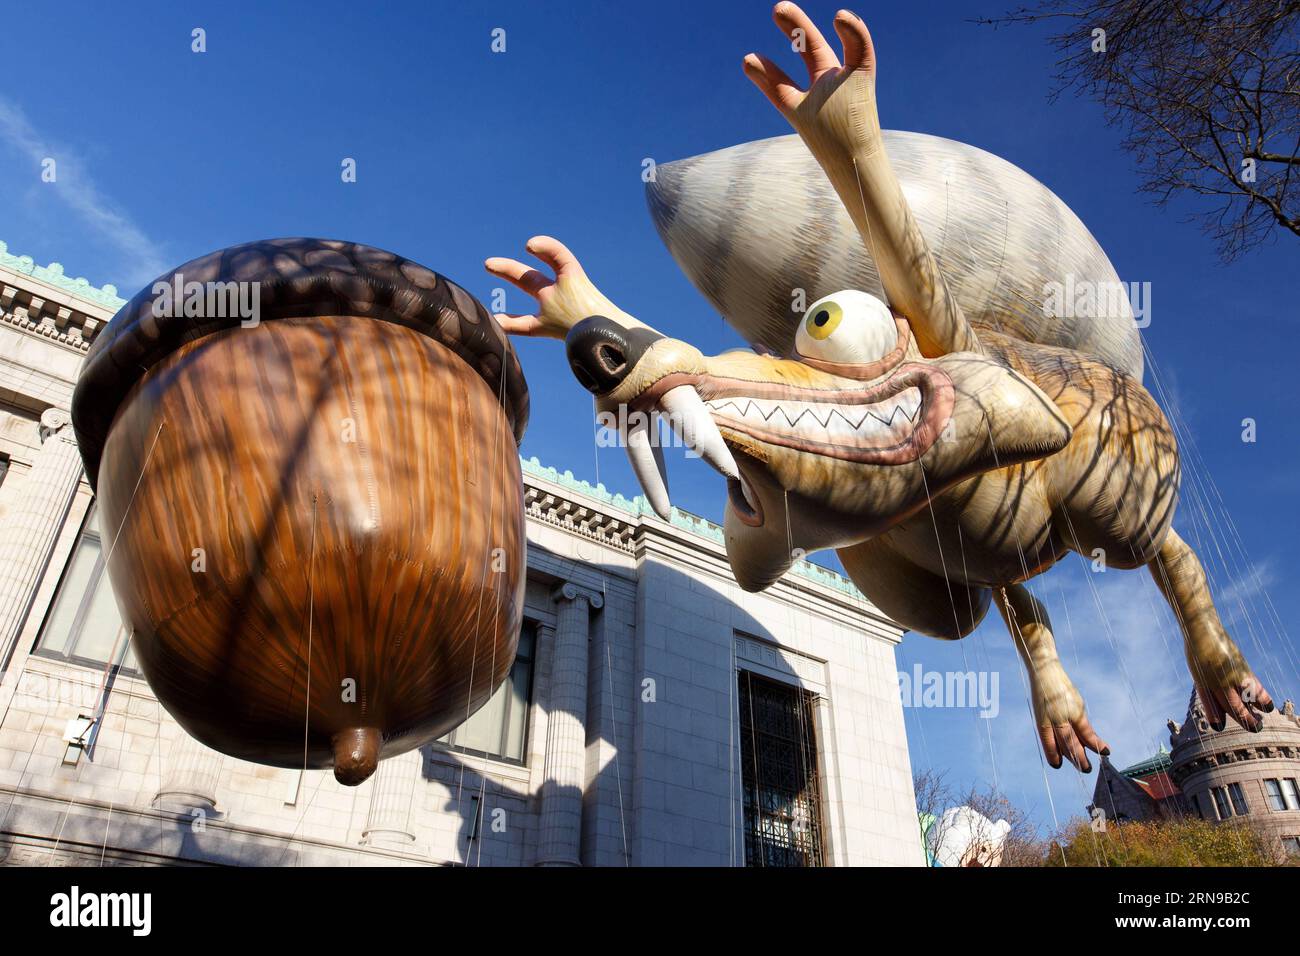 (151126) -- NEW YORK, Nov. 26, 2015 -- Photo taken on Nov. 26, 2015, shows the balloons of ICE AGE S SCRAT & HIS ACORN are seen during the 89th Macy s Thanksgiving Day Parade in New York, the United States. ) U.S.-NEW YORK-THANKSGIVING-PARADE LixMuzi PUBLICATIONxNOTxINxCHN   151126 New York Nov 26 2015 Photo Taken ON Nov 26 2015 Shows The Balloons of ICE Age S Scrat & His ACORN are Lakes during The 89th Macy S Thanksgiving Day Parade in New York The United States U S New York Thanksgiving Parade LiXMuzi PUBLICATIONxNOTxINxCHN Stock Photo